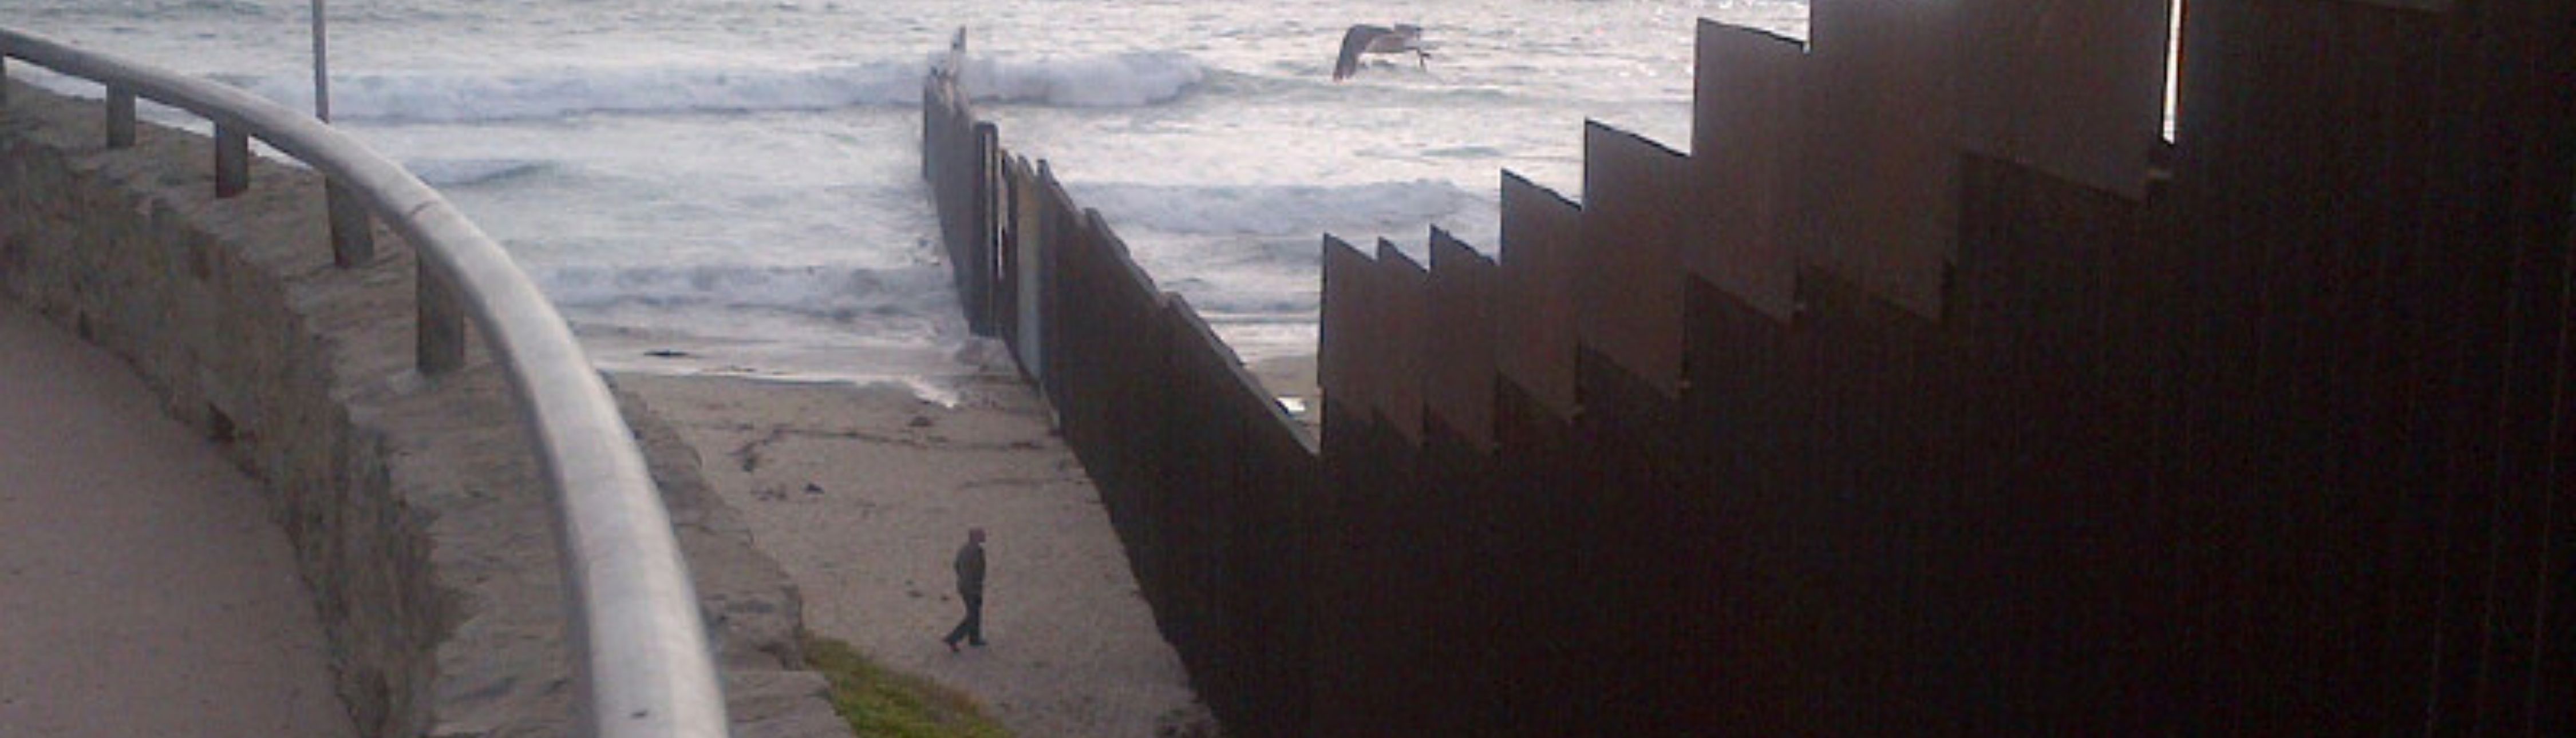 Border wall between Mexico and U.S. extending into the ocean